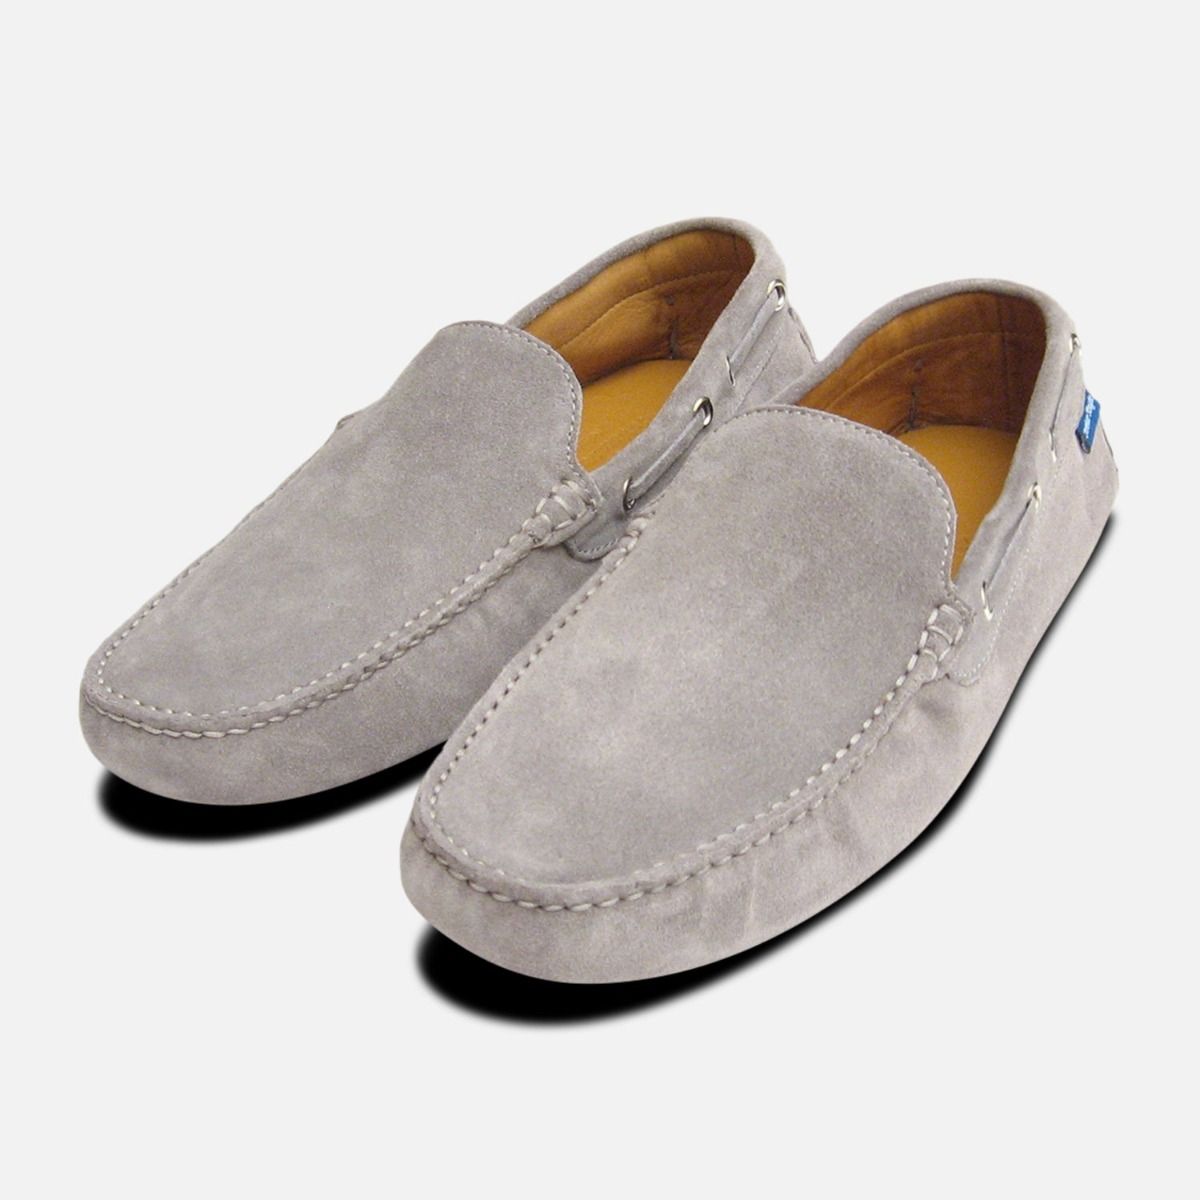 mens grey suede loafers